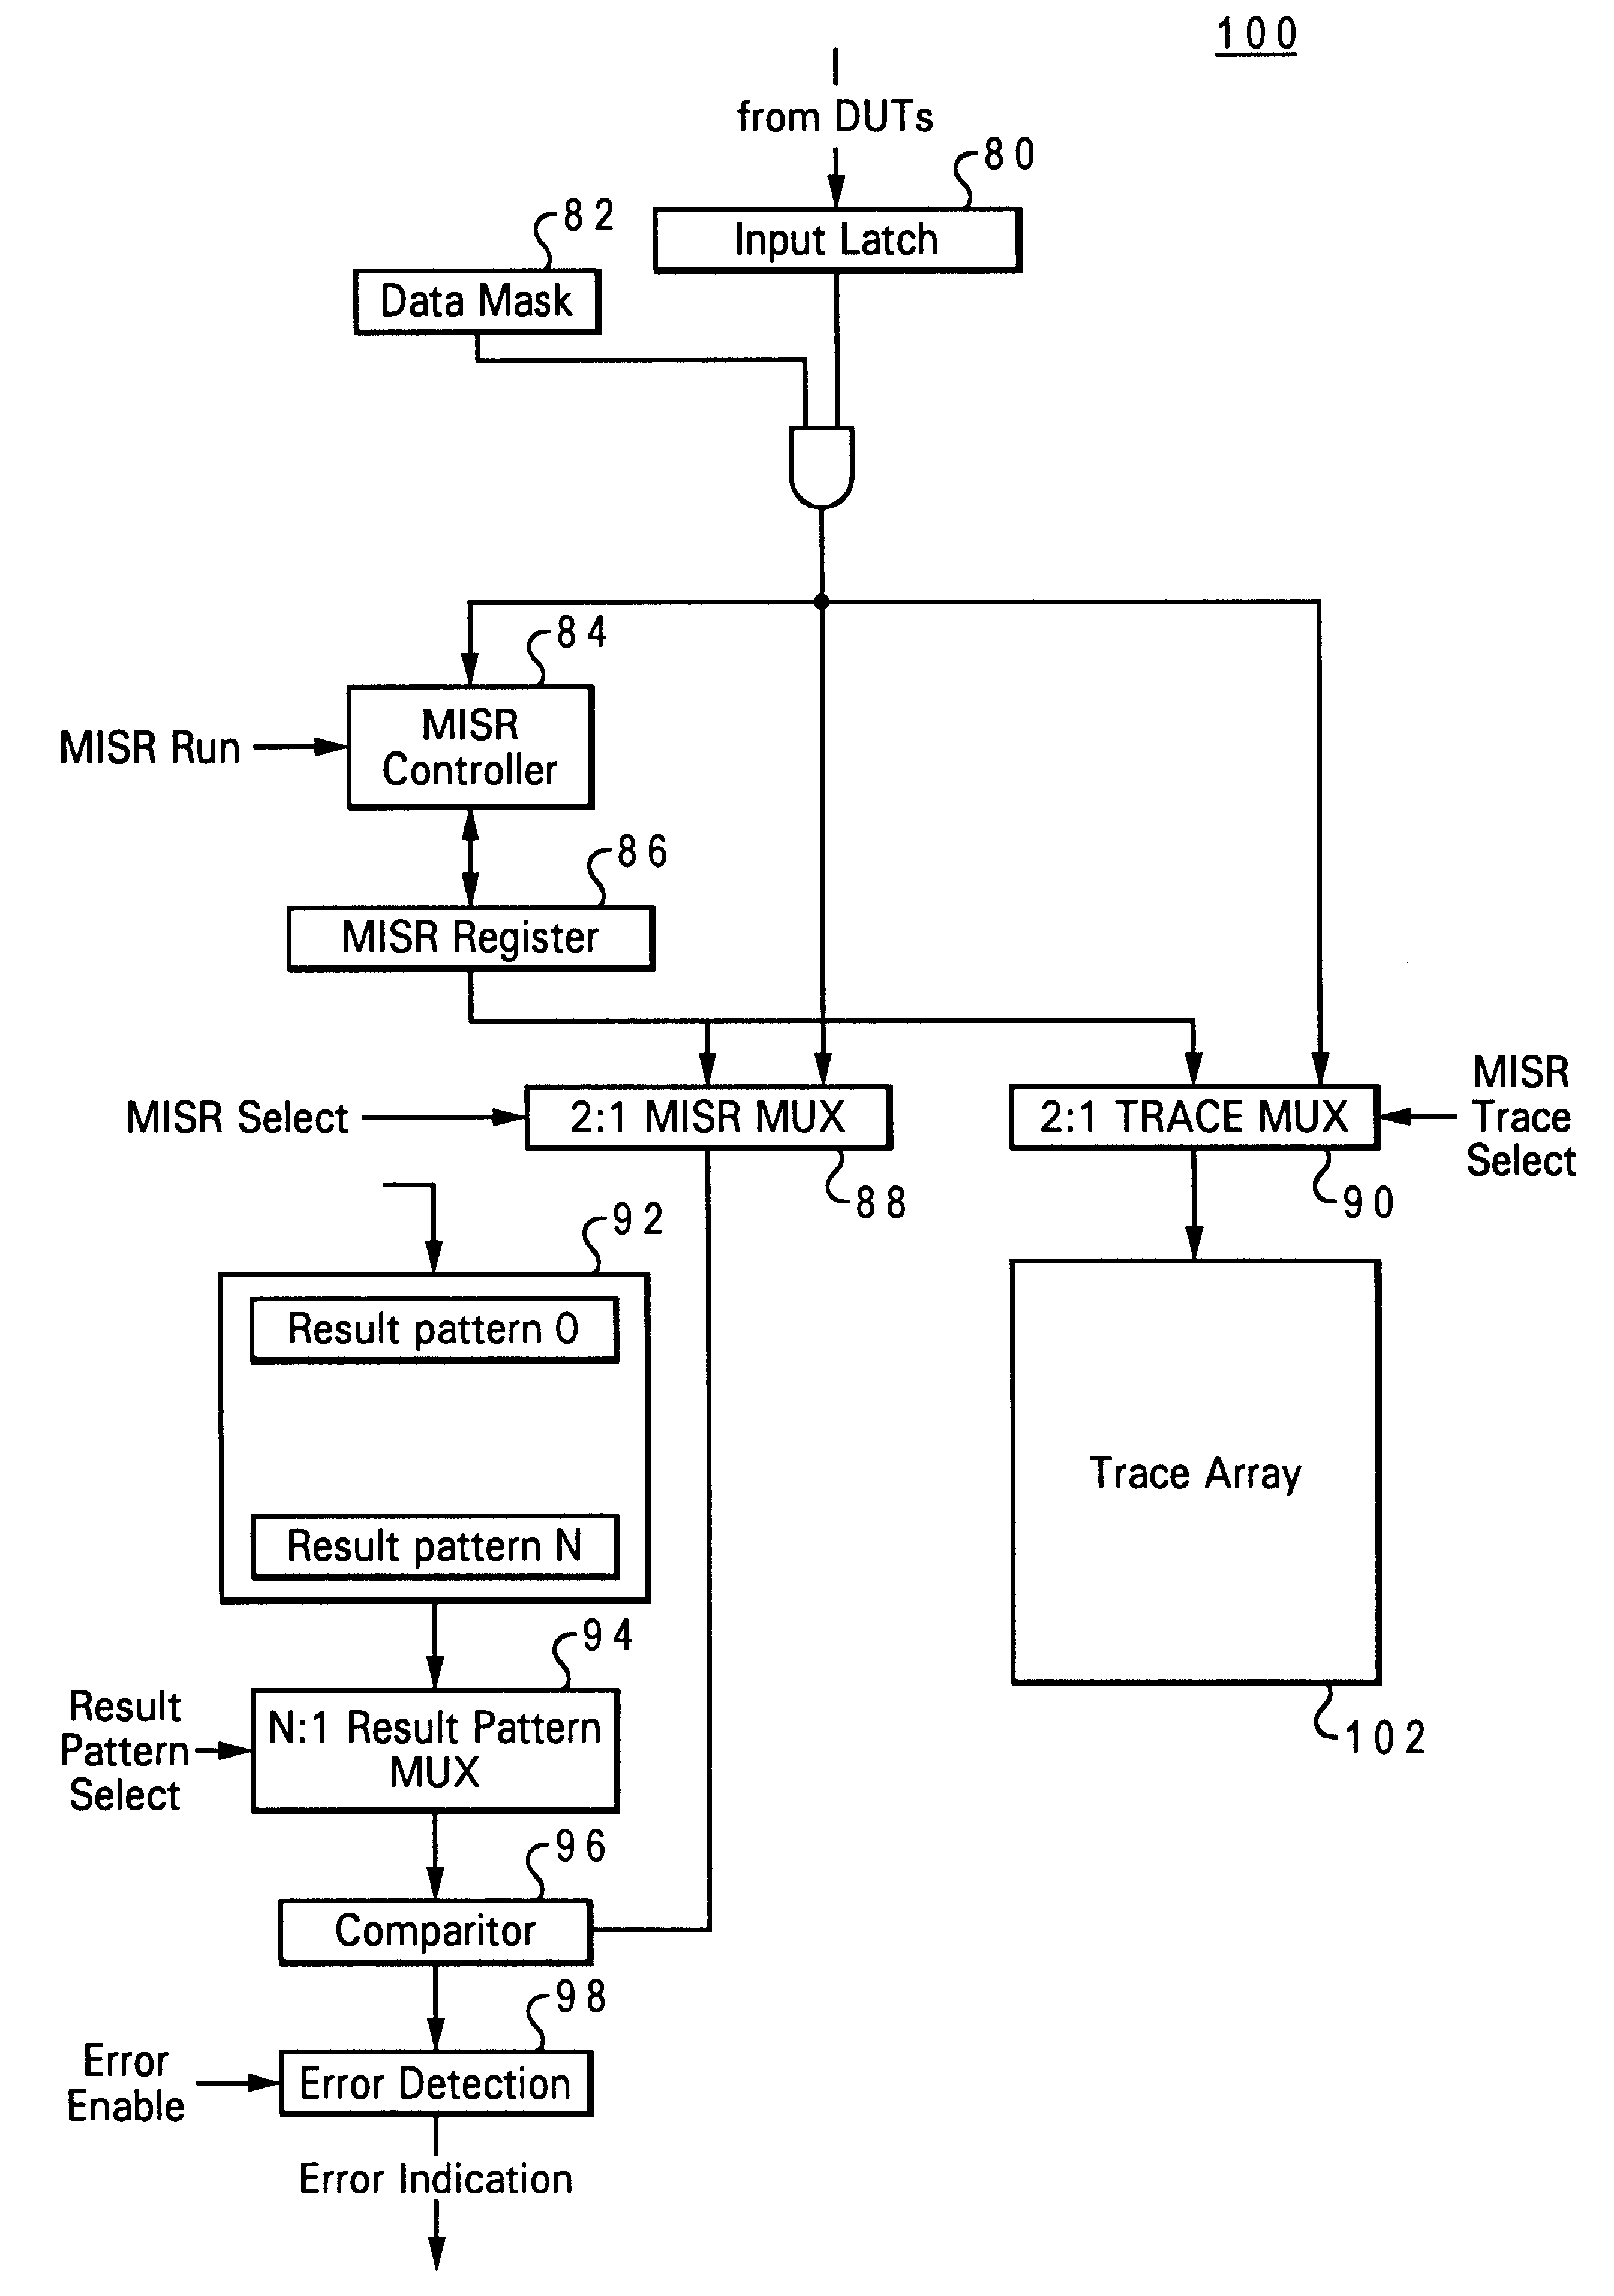 Method and system for performing pseudo-random testing of an integrated circuit